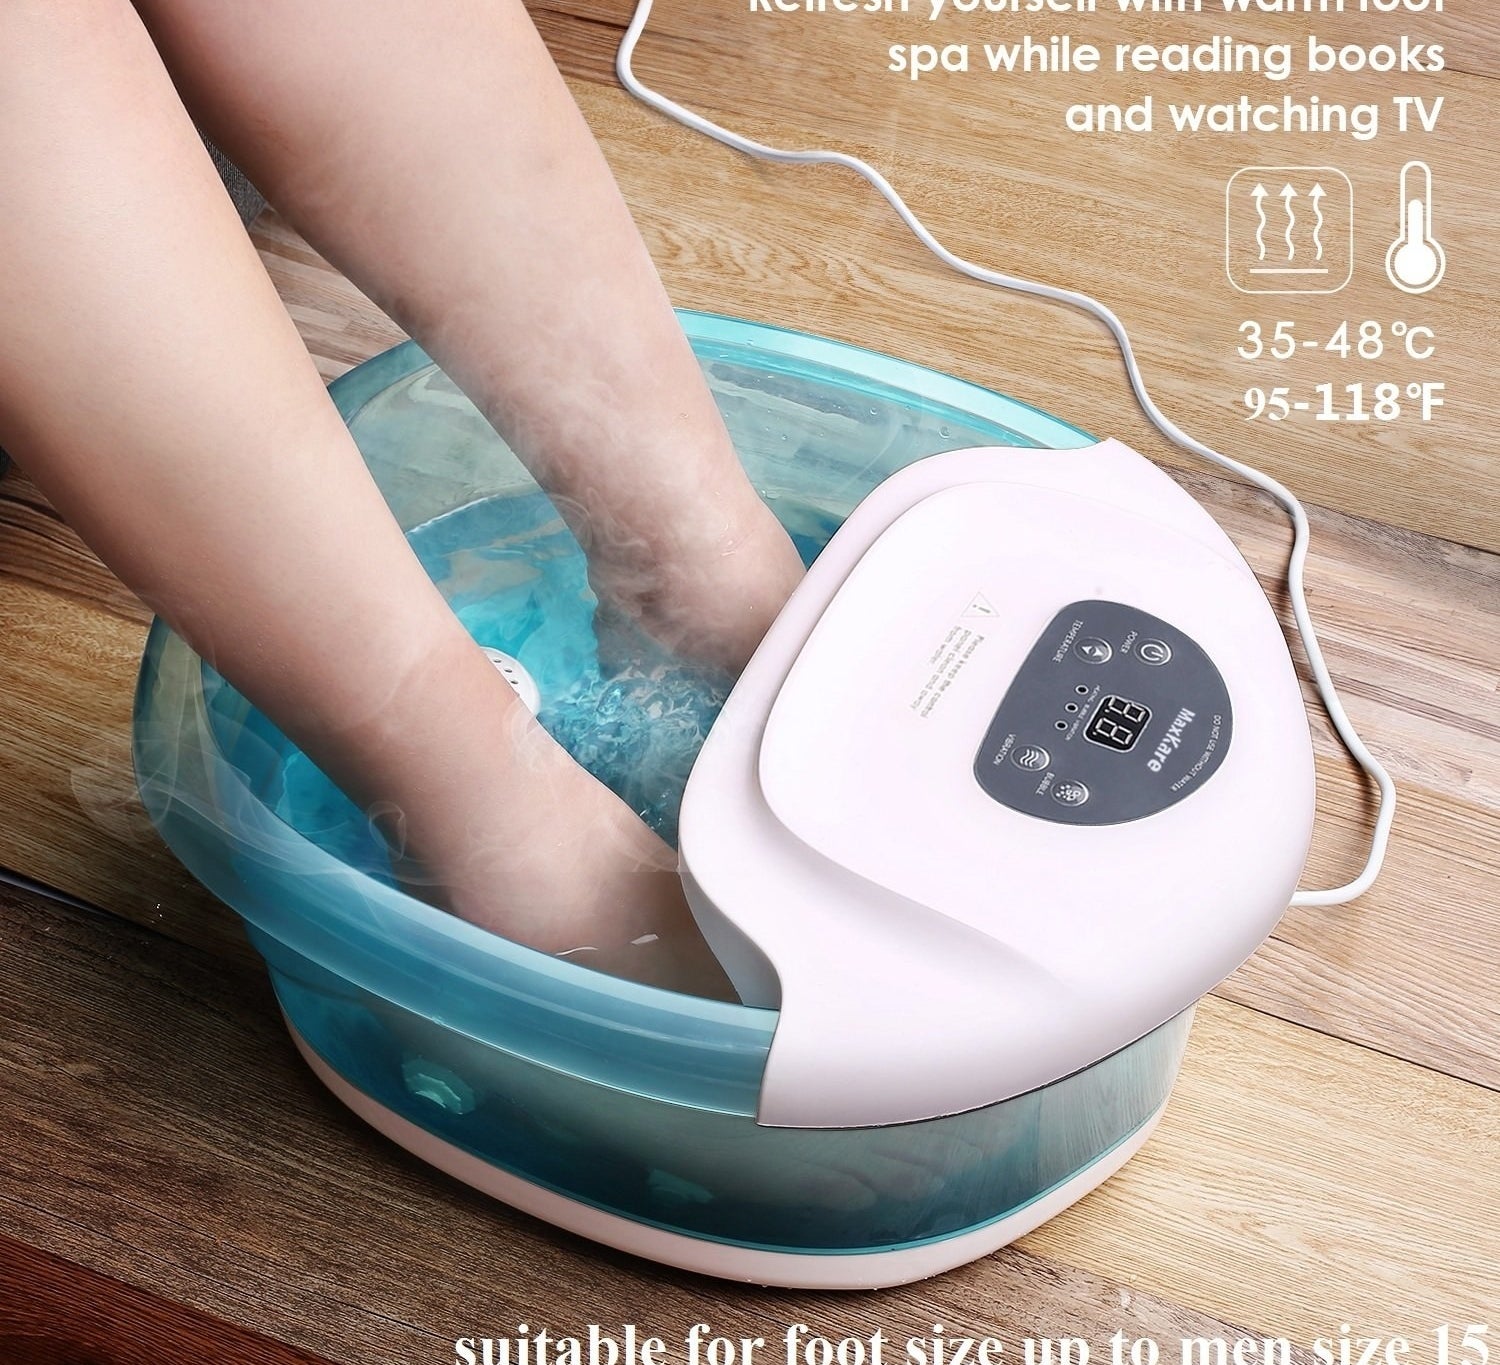 the foot spa